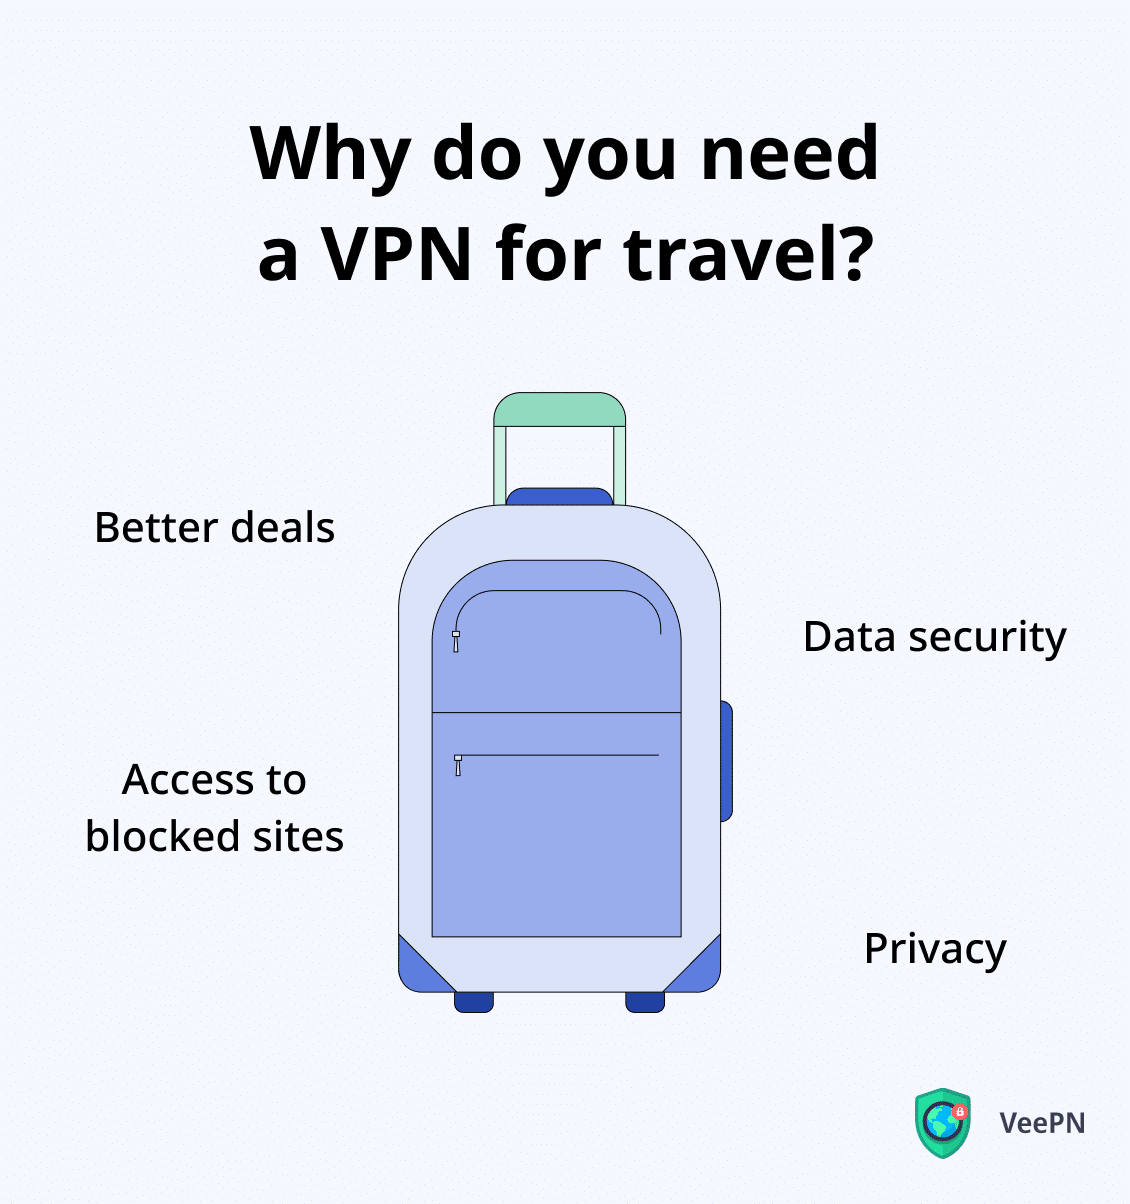 Why do you need a VPN for traveling?